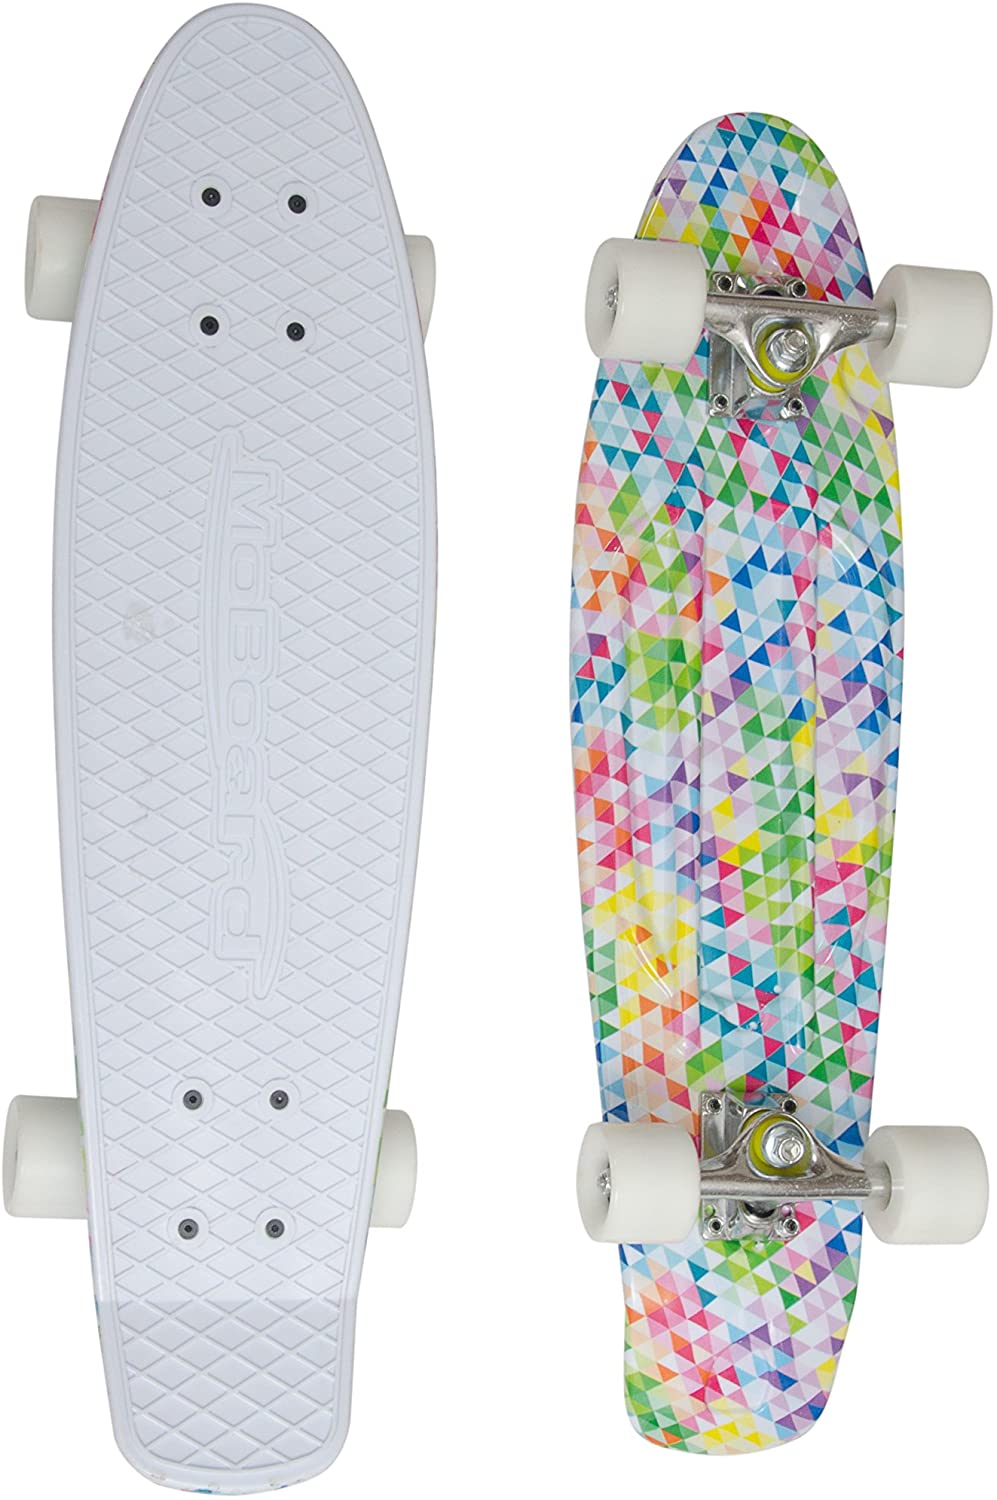 27 inch Vintage Style with Interchangeable Wheels Pro and Beginner MoBoard Classic 27 Skateboard 